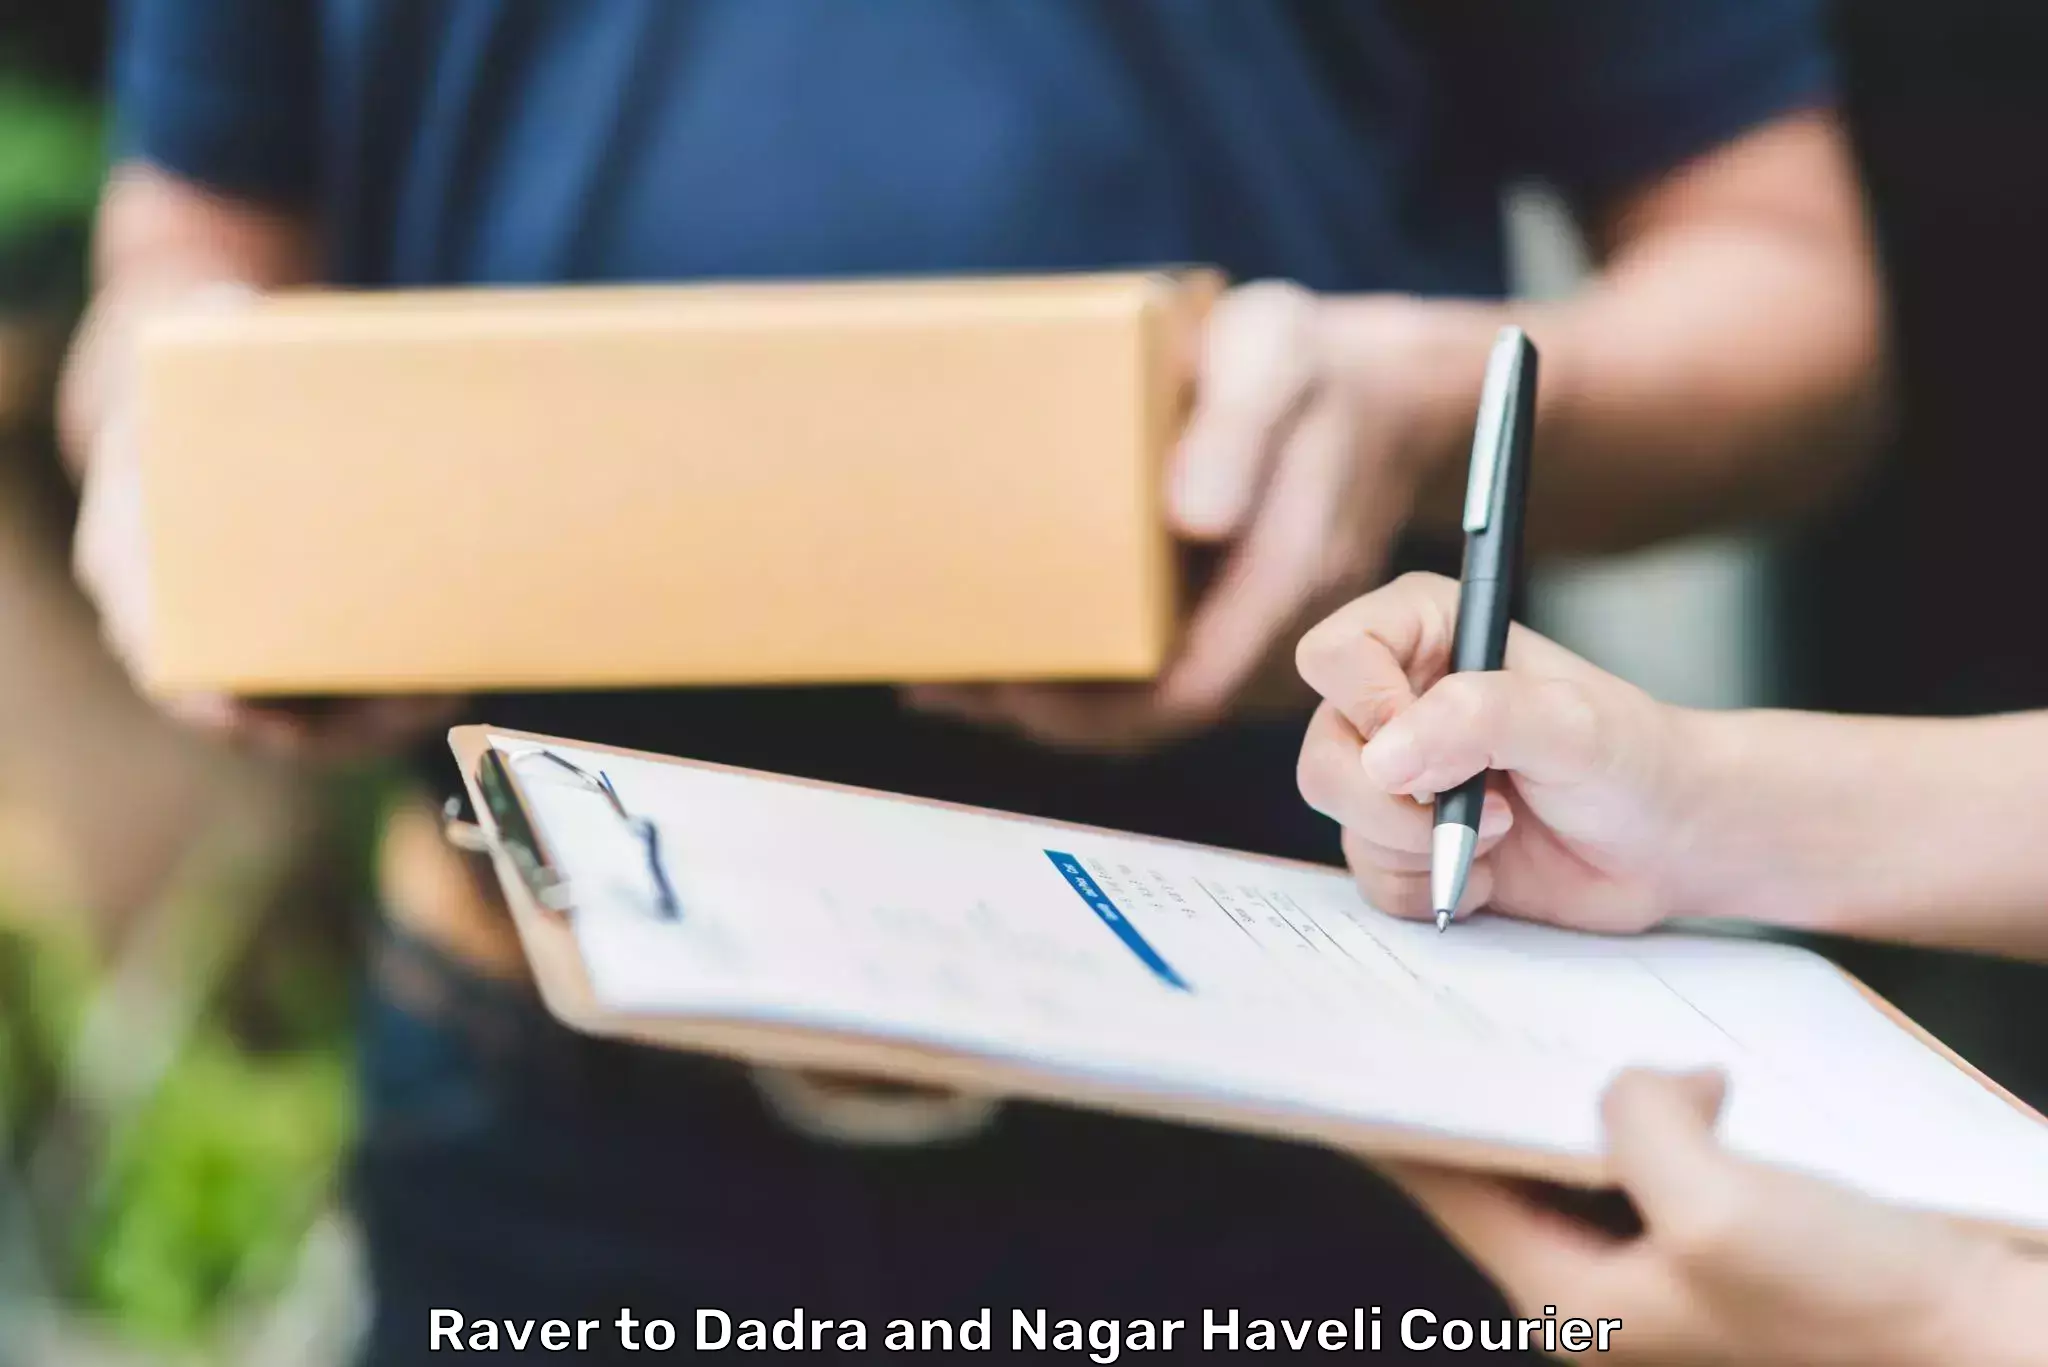 Multi-service courier options Raver to Dadra and Nagar Haveli